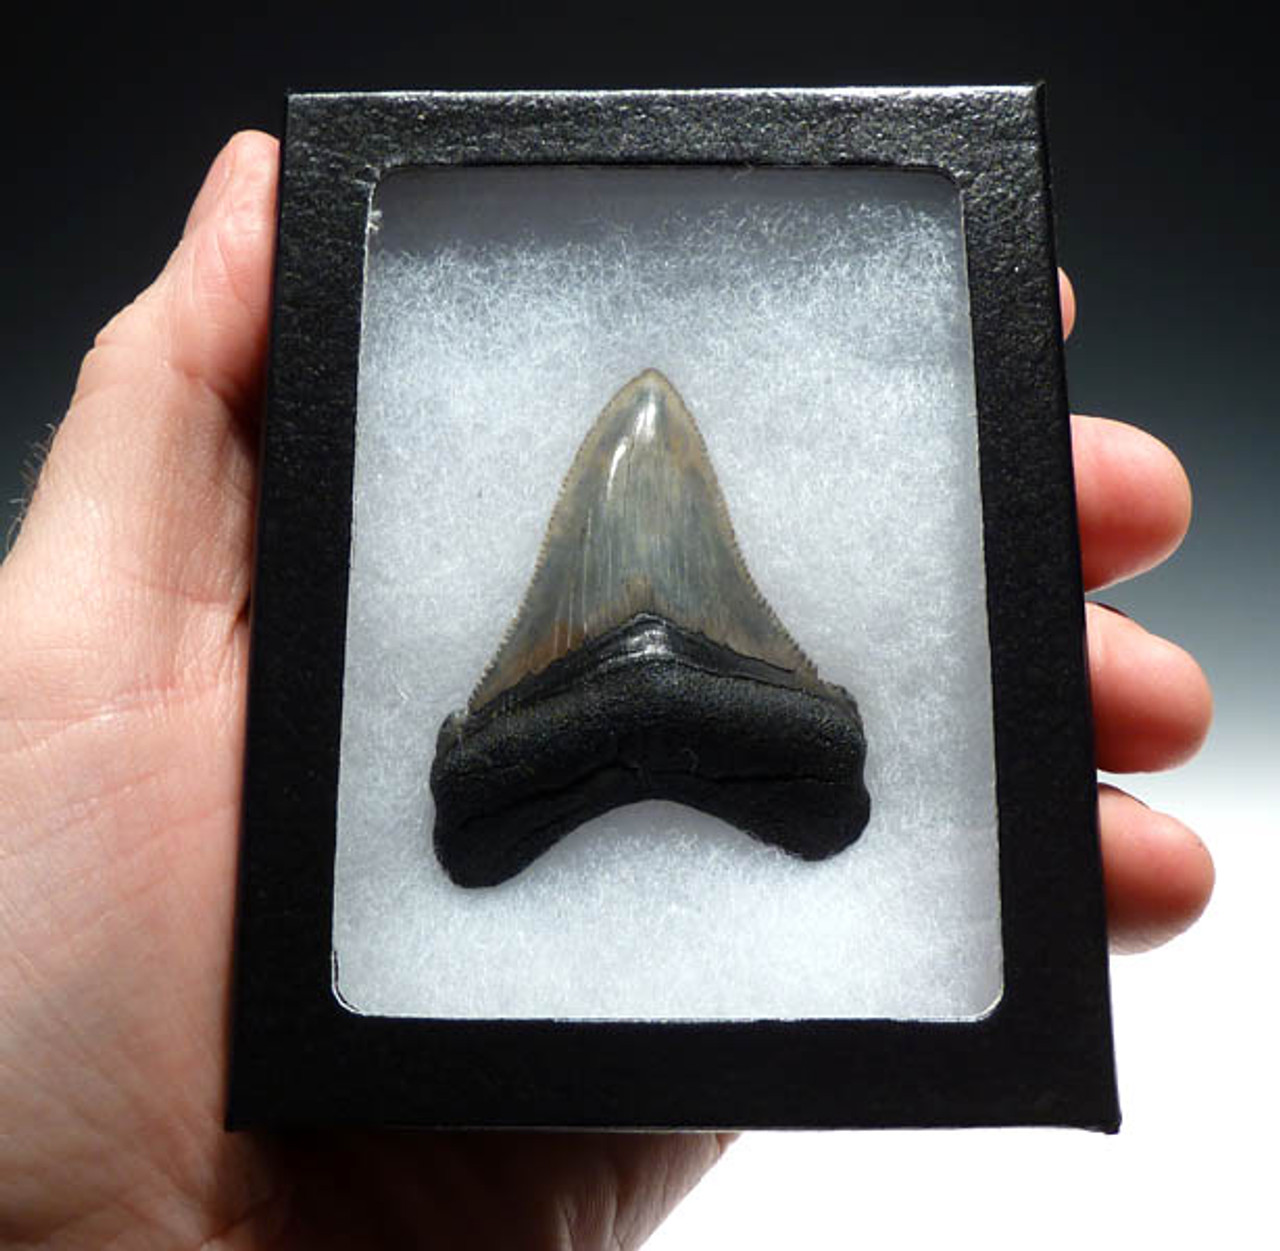 SHX002 - SUPERB CARCHAROCLES ANGUSTIDENS FOSSIL SHARK TOOTH